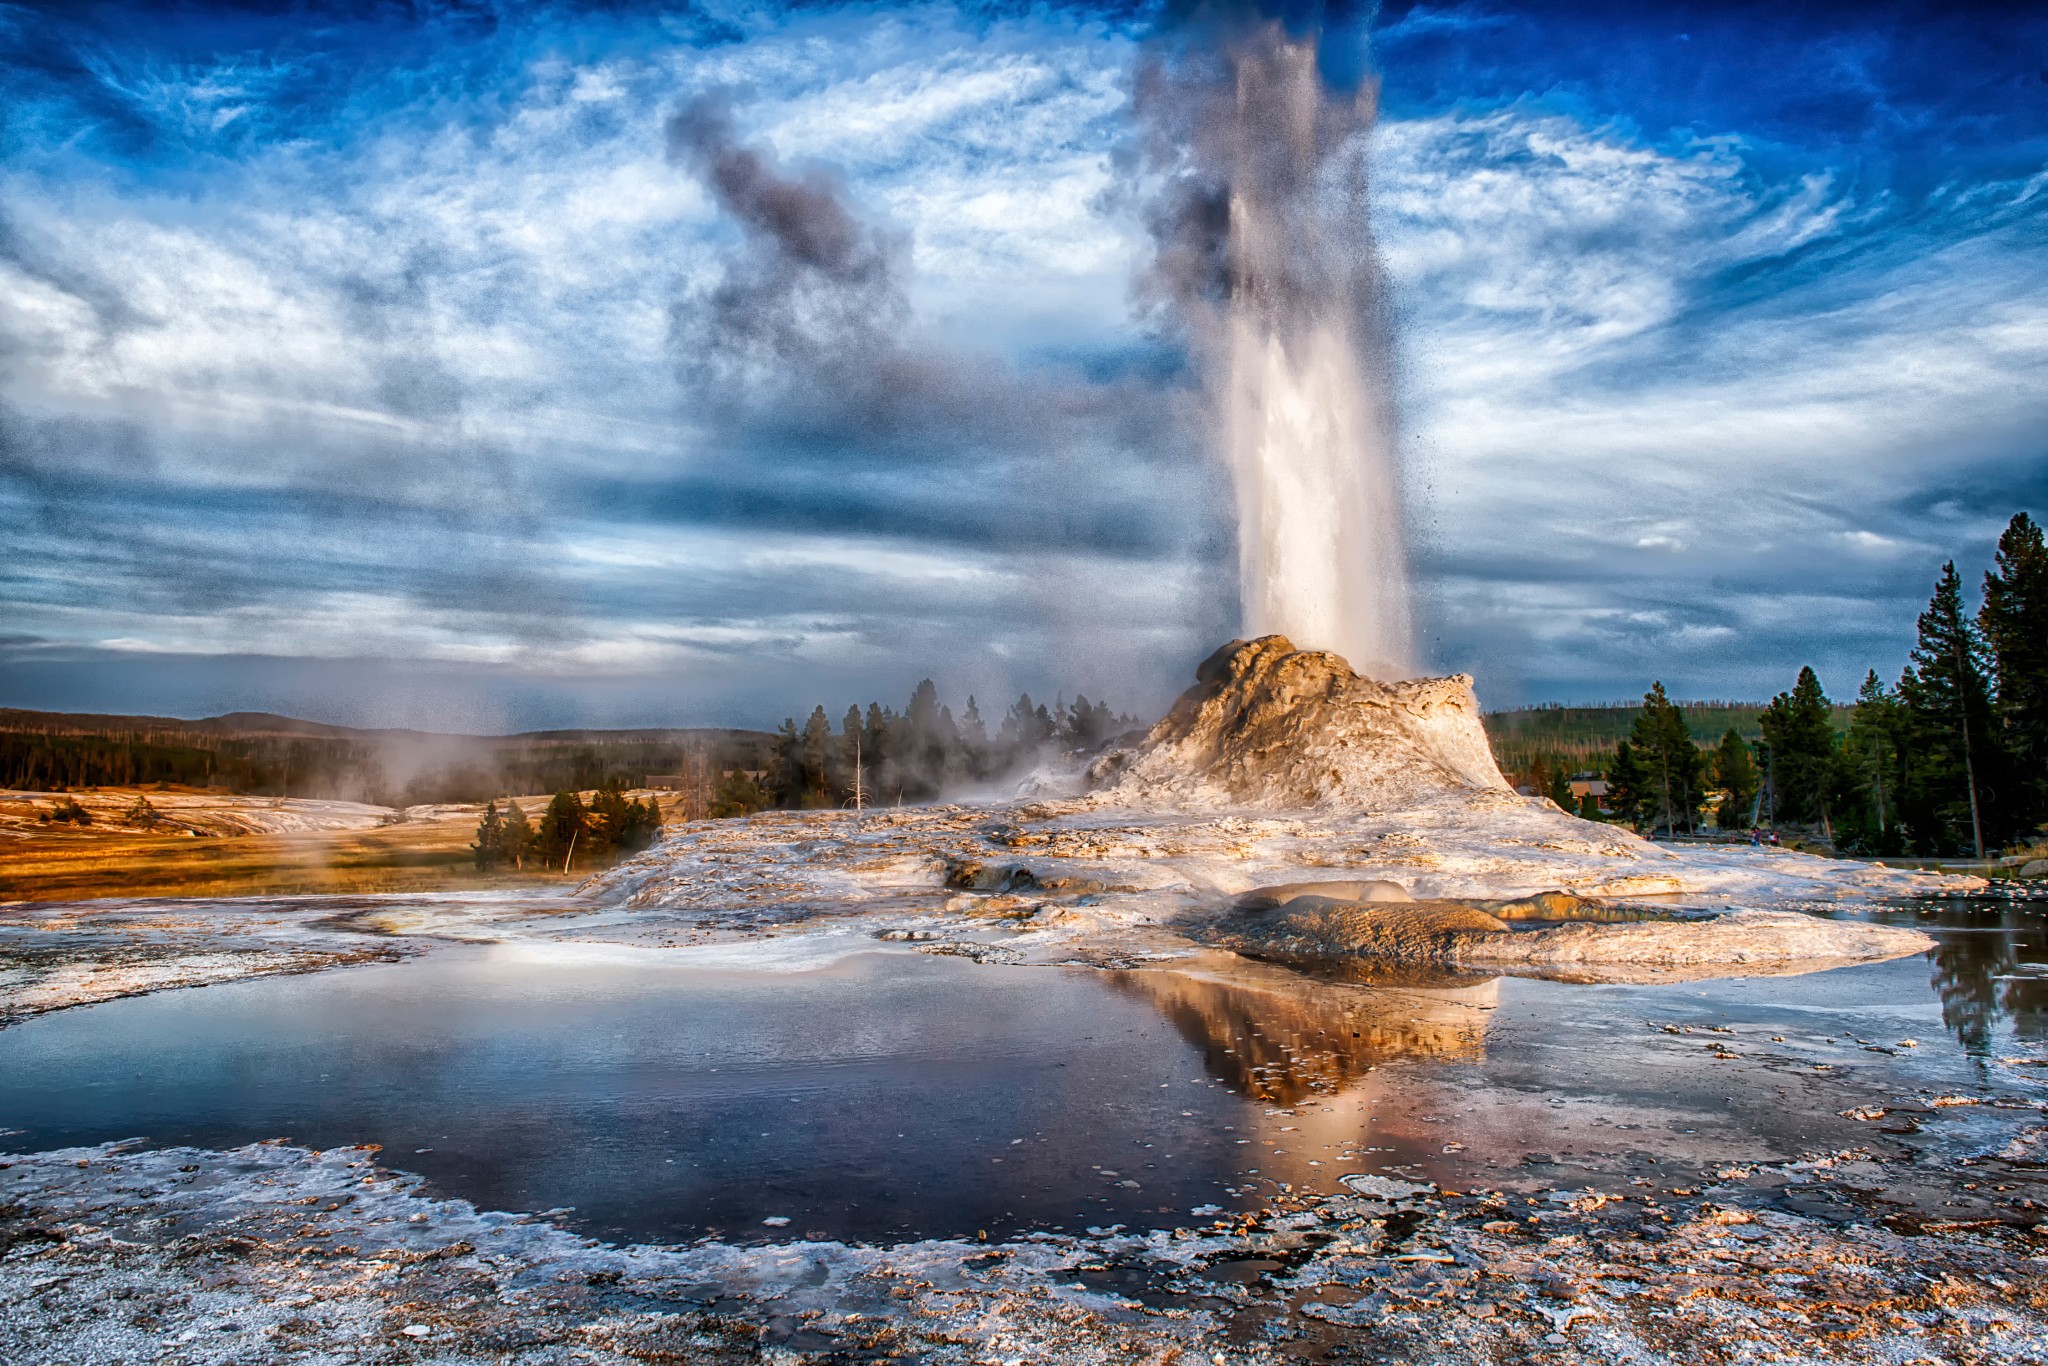 General 2048x1366 nature landscape trees geysers water Wyoming USA water drops splashes rocks HDR clouds forest reflection Yellowstone National Park